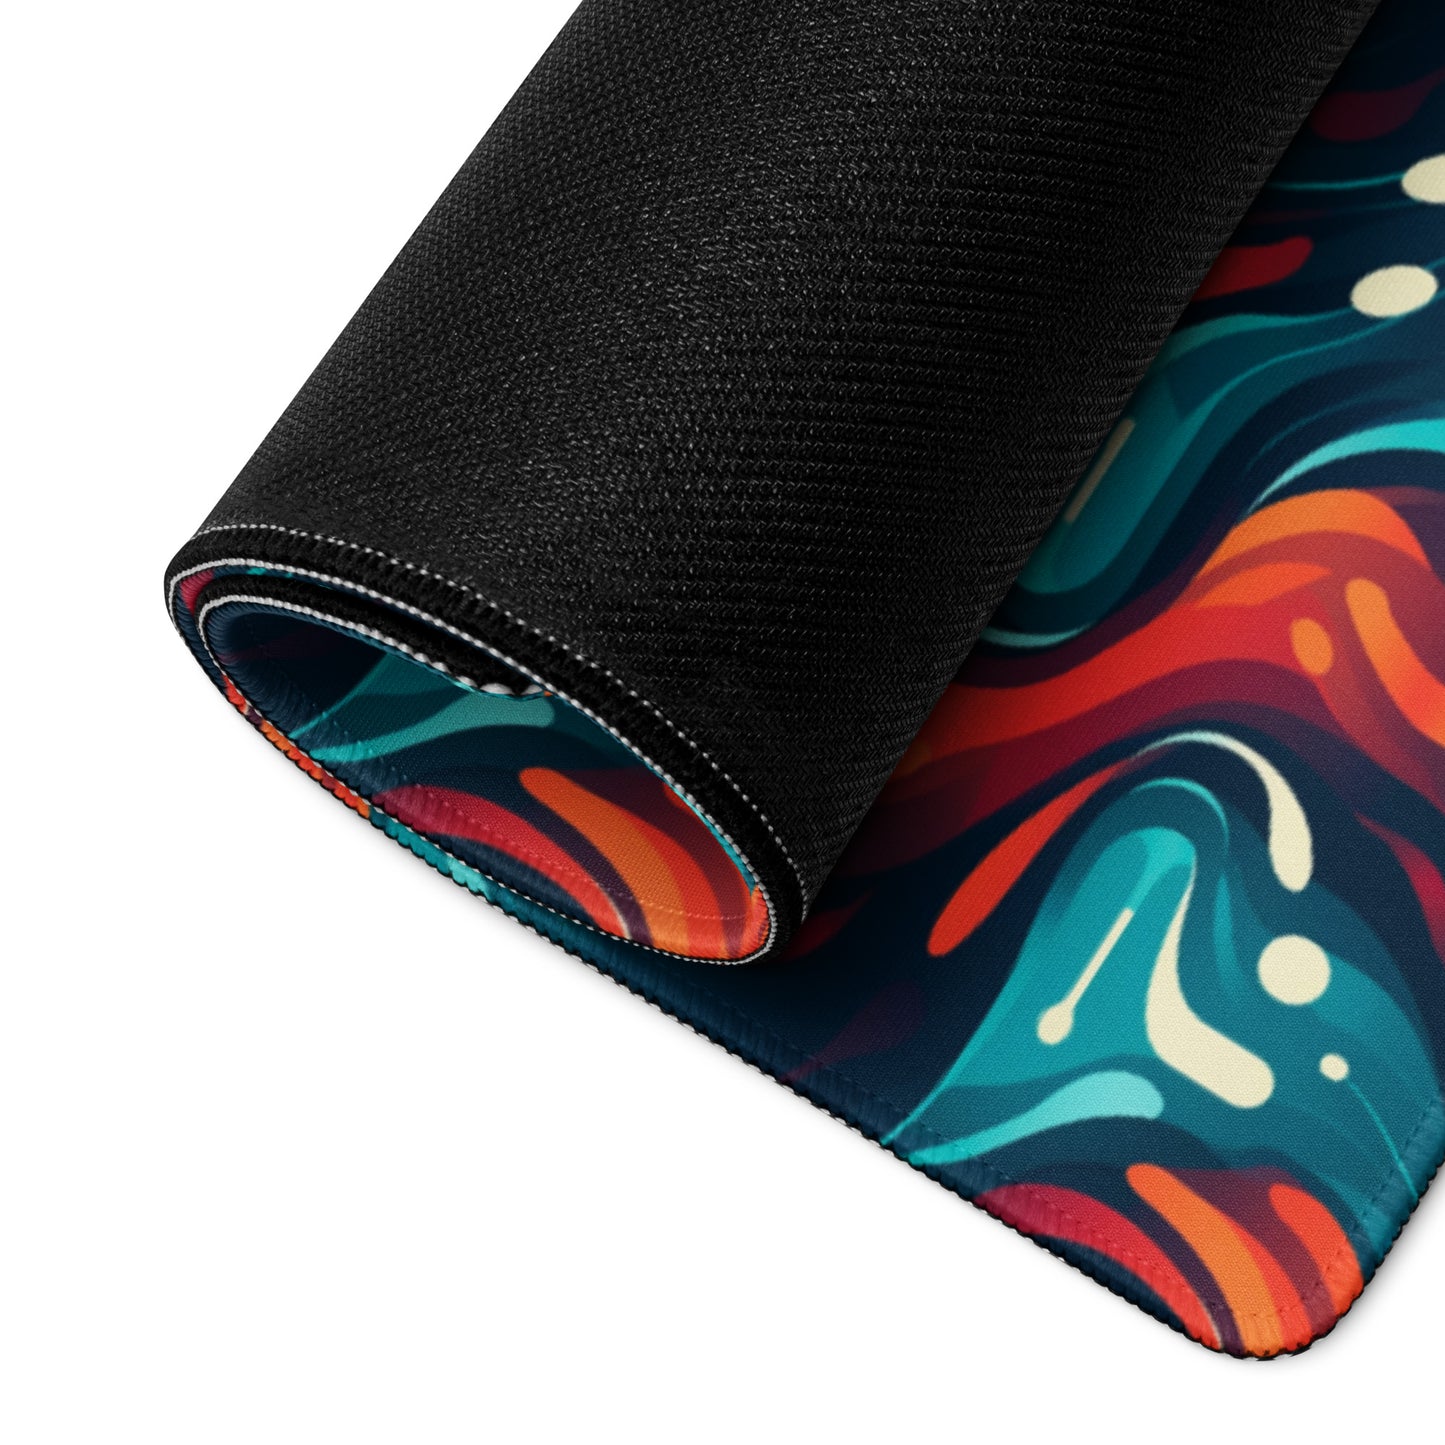 A 36" x 18" desk pad with a blue and orange wavy pattern rolled up.